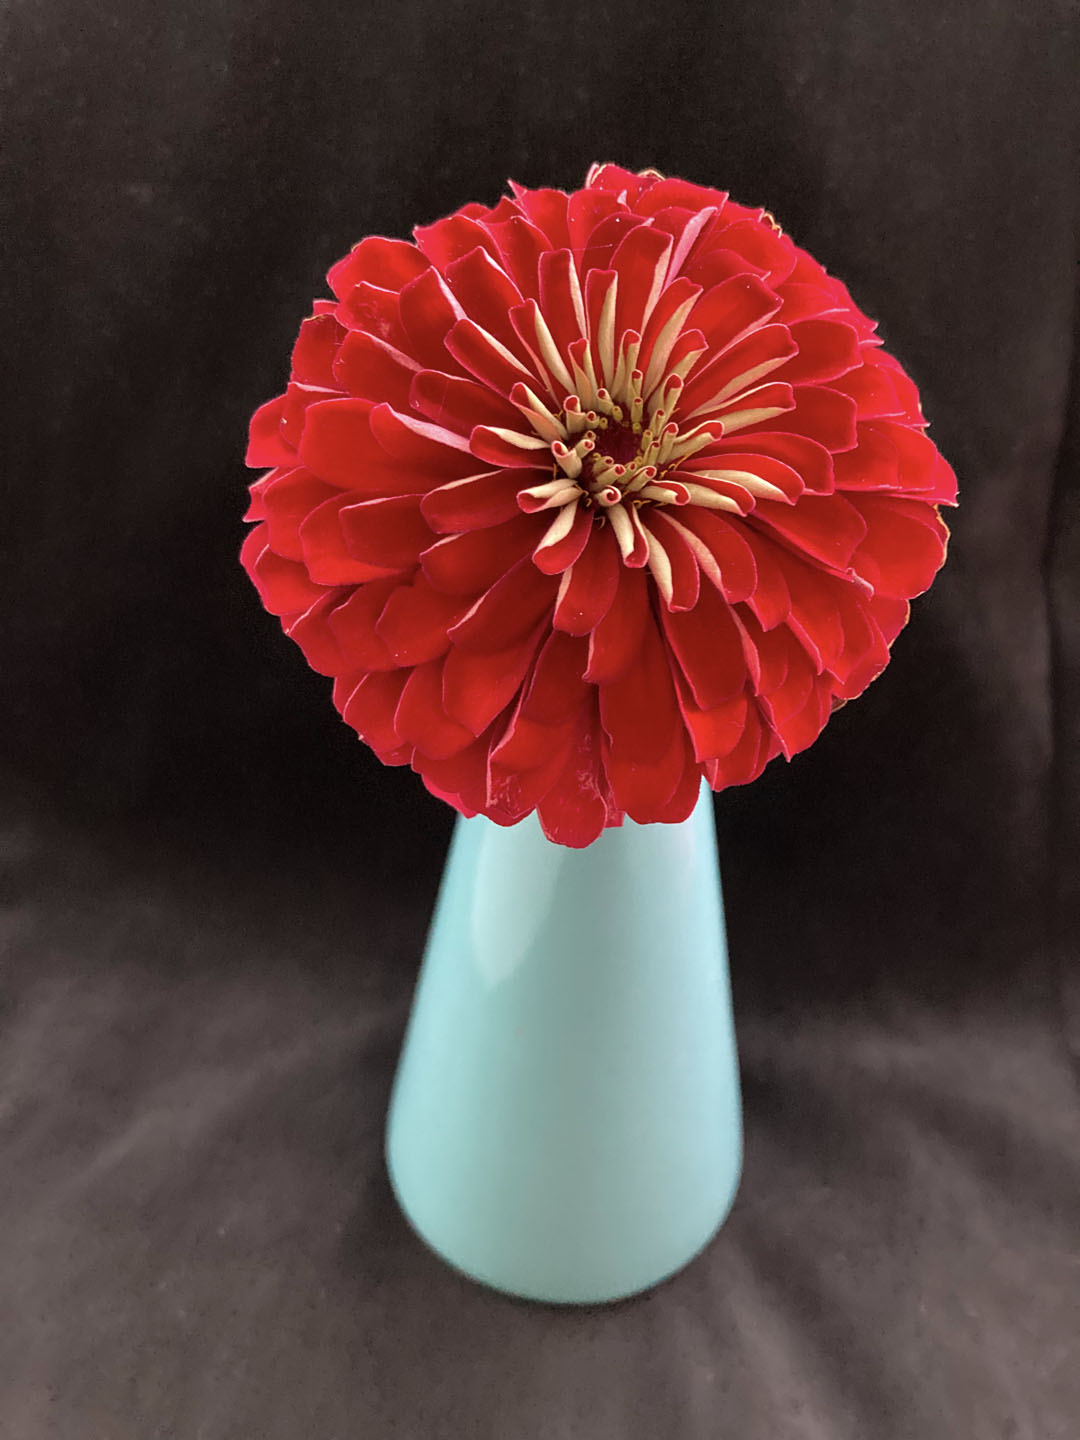 2nd PrizeOpen Color In Class 1 By Marilyn Miller For Zinnia Portrait AUG-2020.jpg